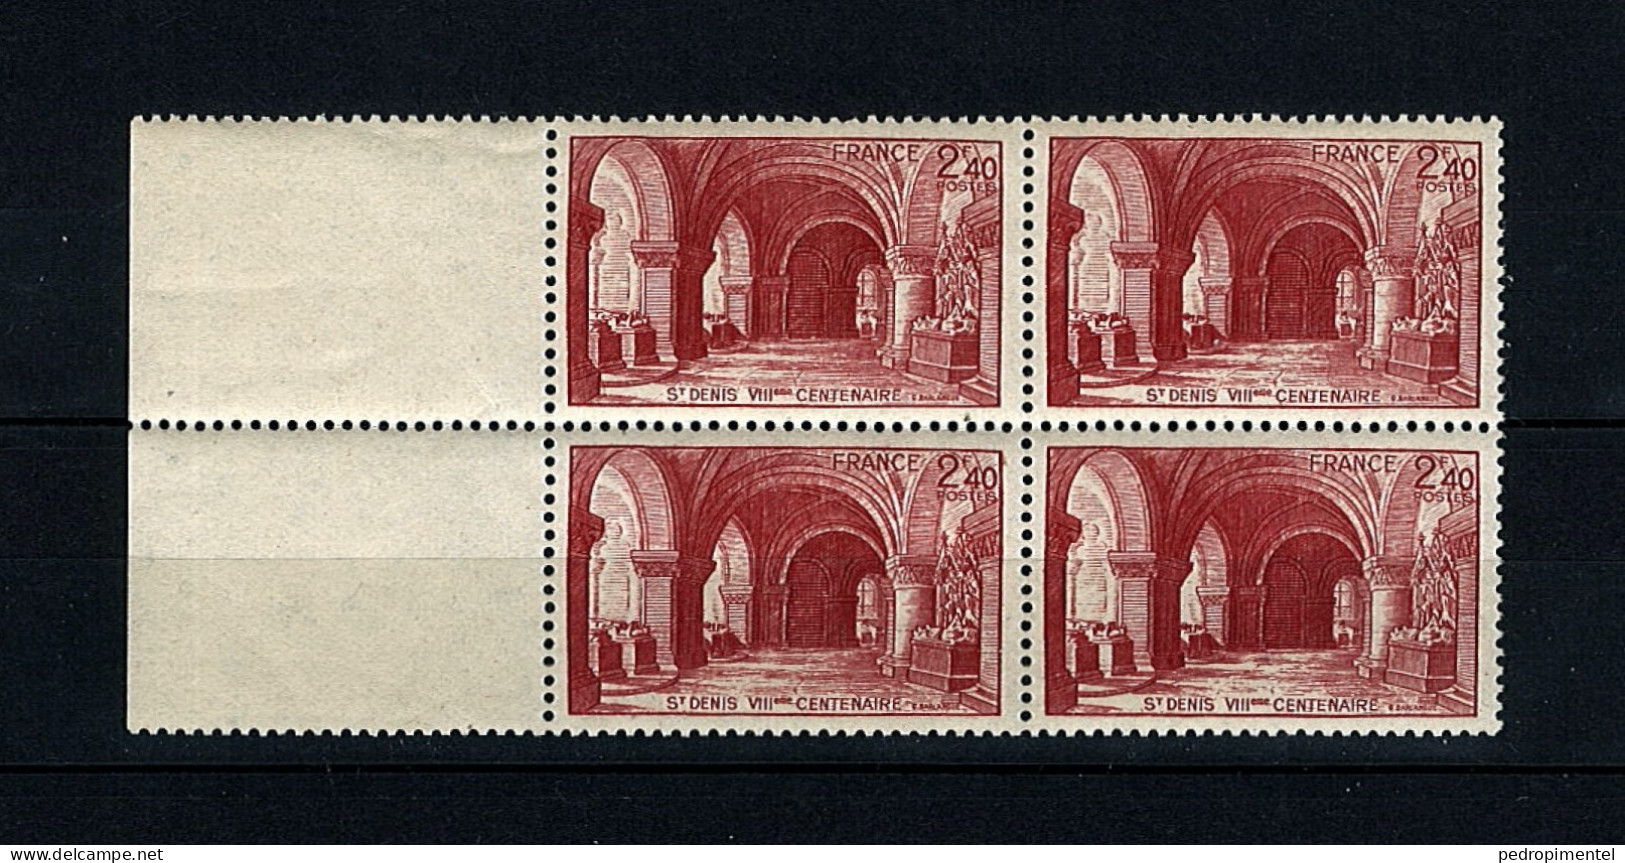 France Stamps | 1944 | The 800th Anniversay Of St Denis  | MNH #648 - Nuevos